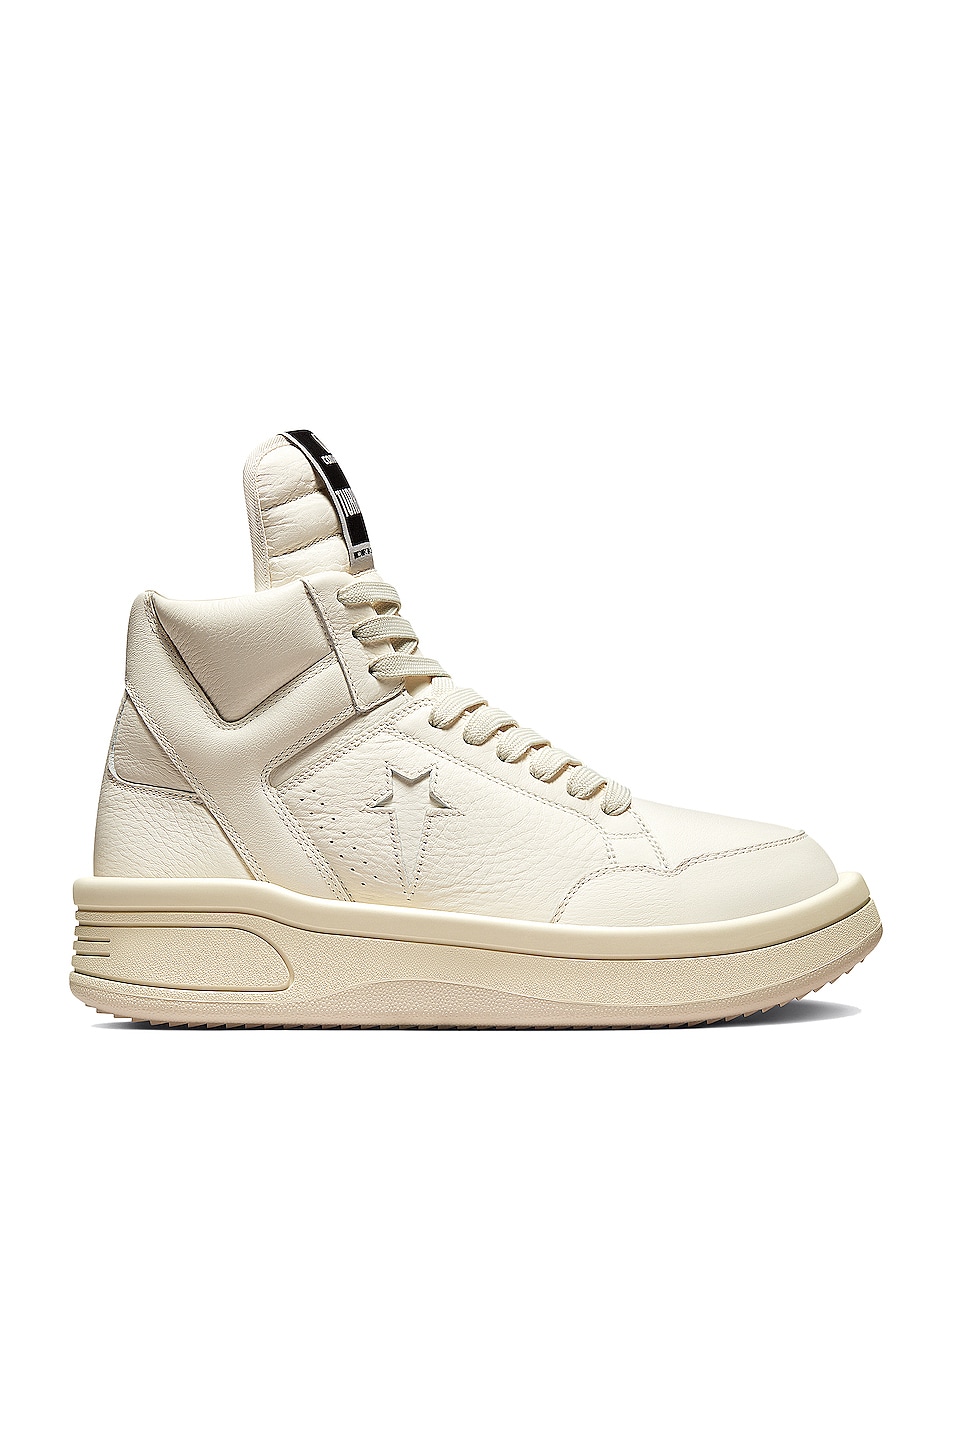 Image 1 of DRKSHDW by Rick Owens x Converse TurboWPN Boot in White